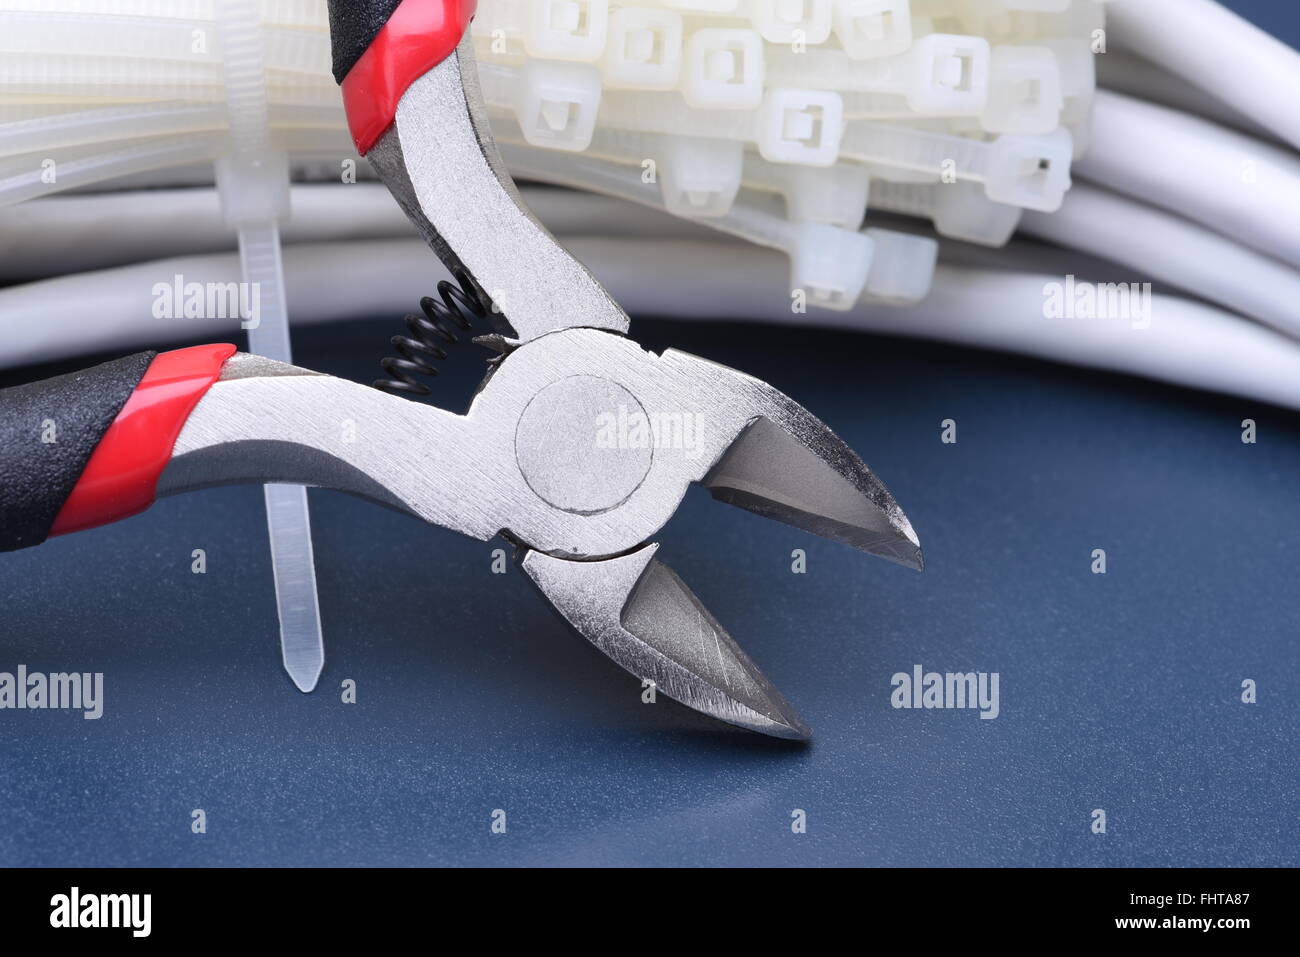 Pliers with cables and bunch of cable ties Stock Photo